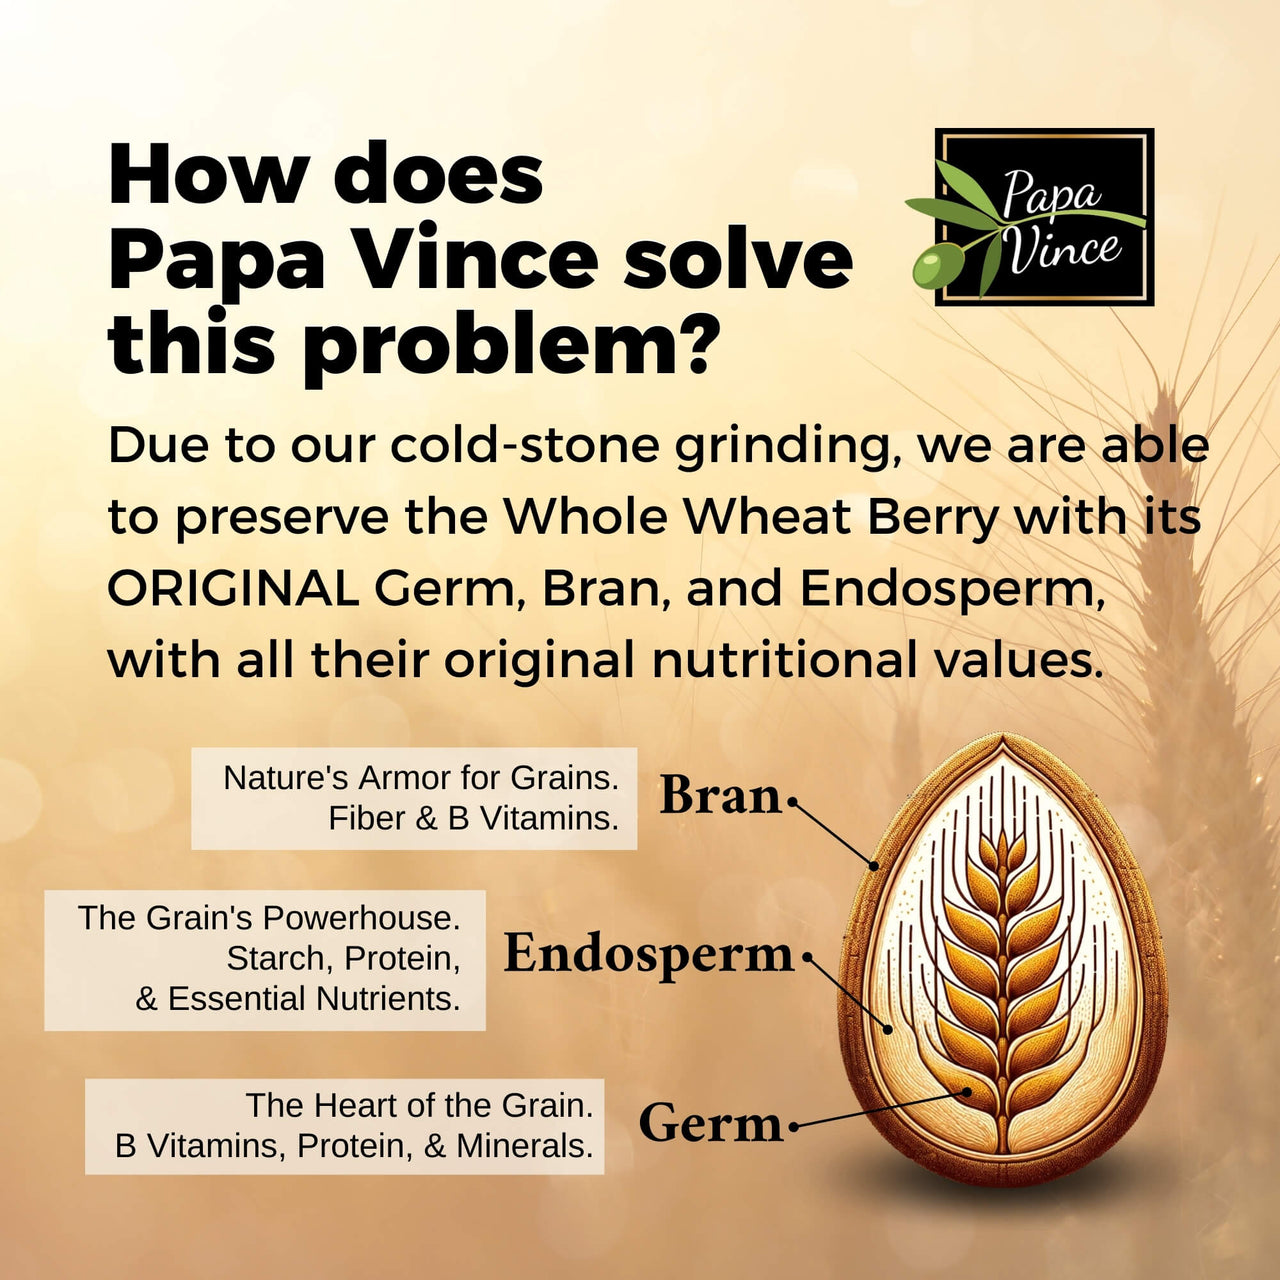 Whole wheat cold stone grinding pasta, non gmo, non enriched, no folic acid, low gluten ancient grains, sicily Italy, artisanal unrefined, minimally processed, Papa Vince